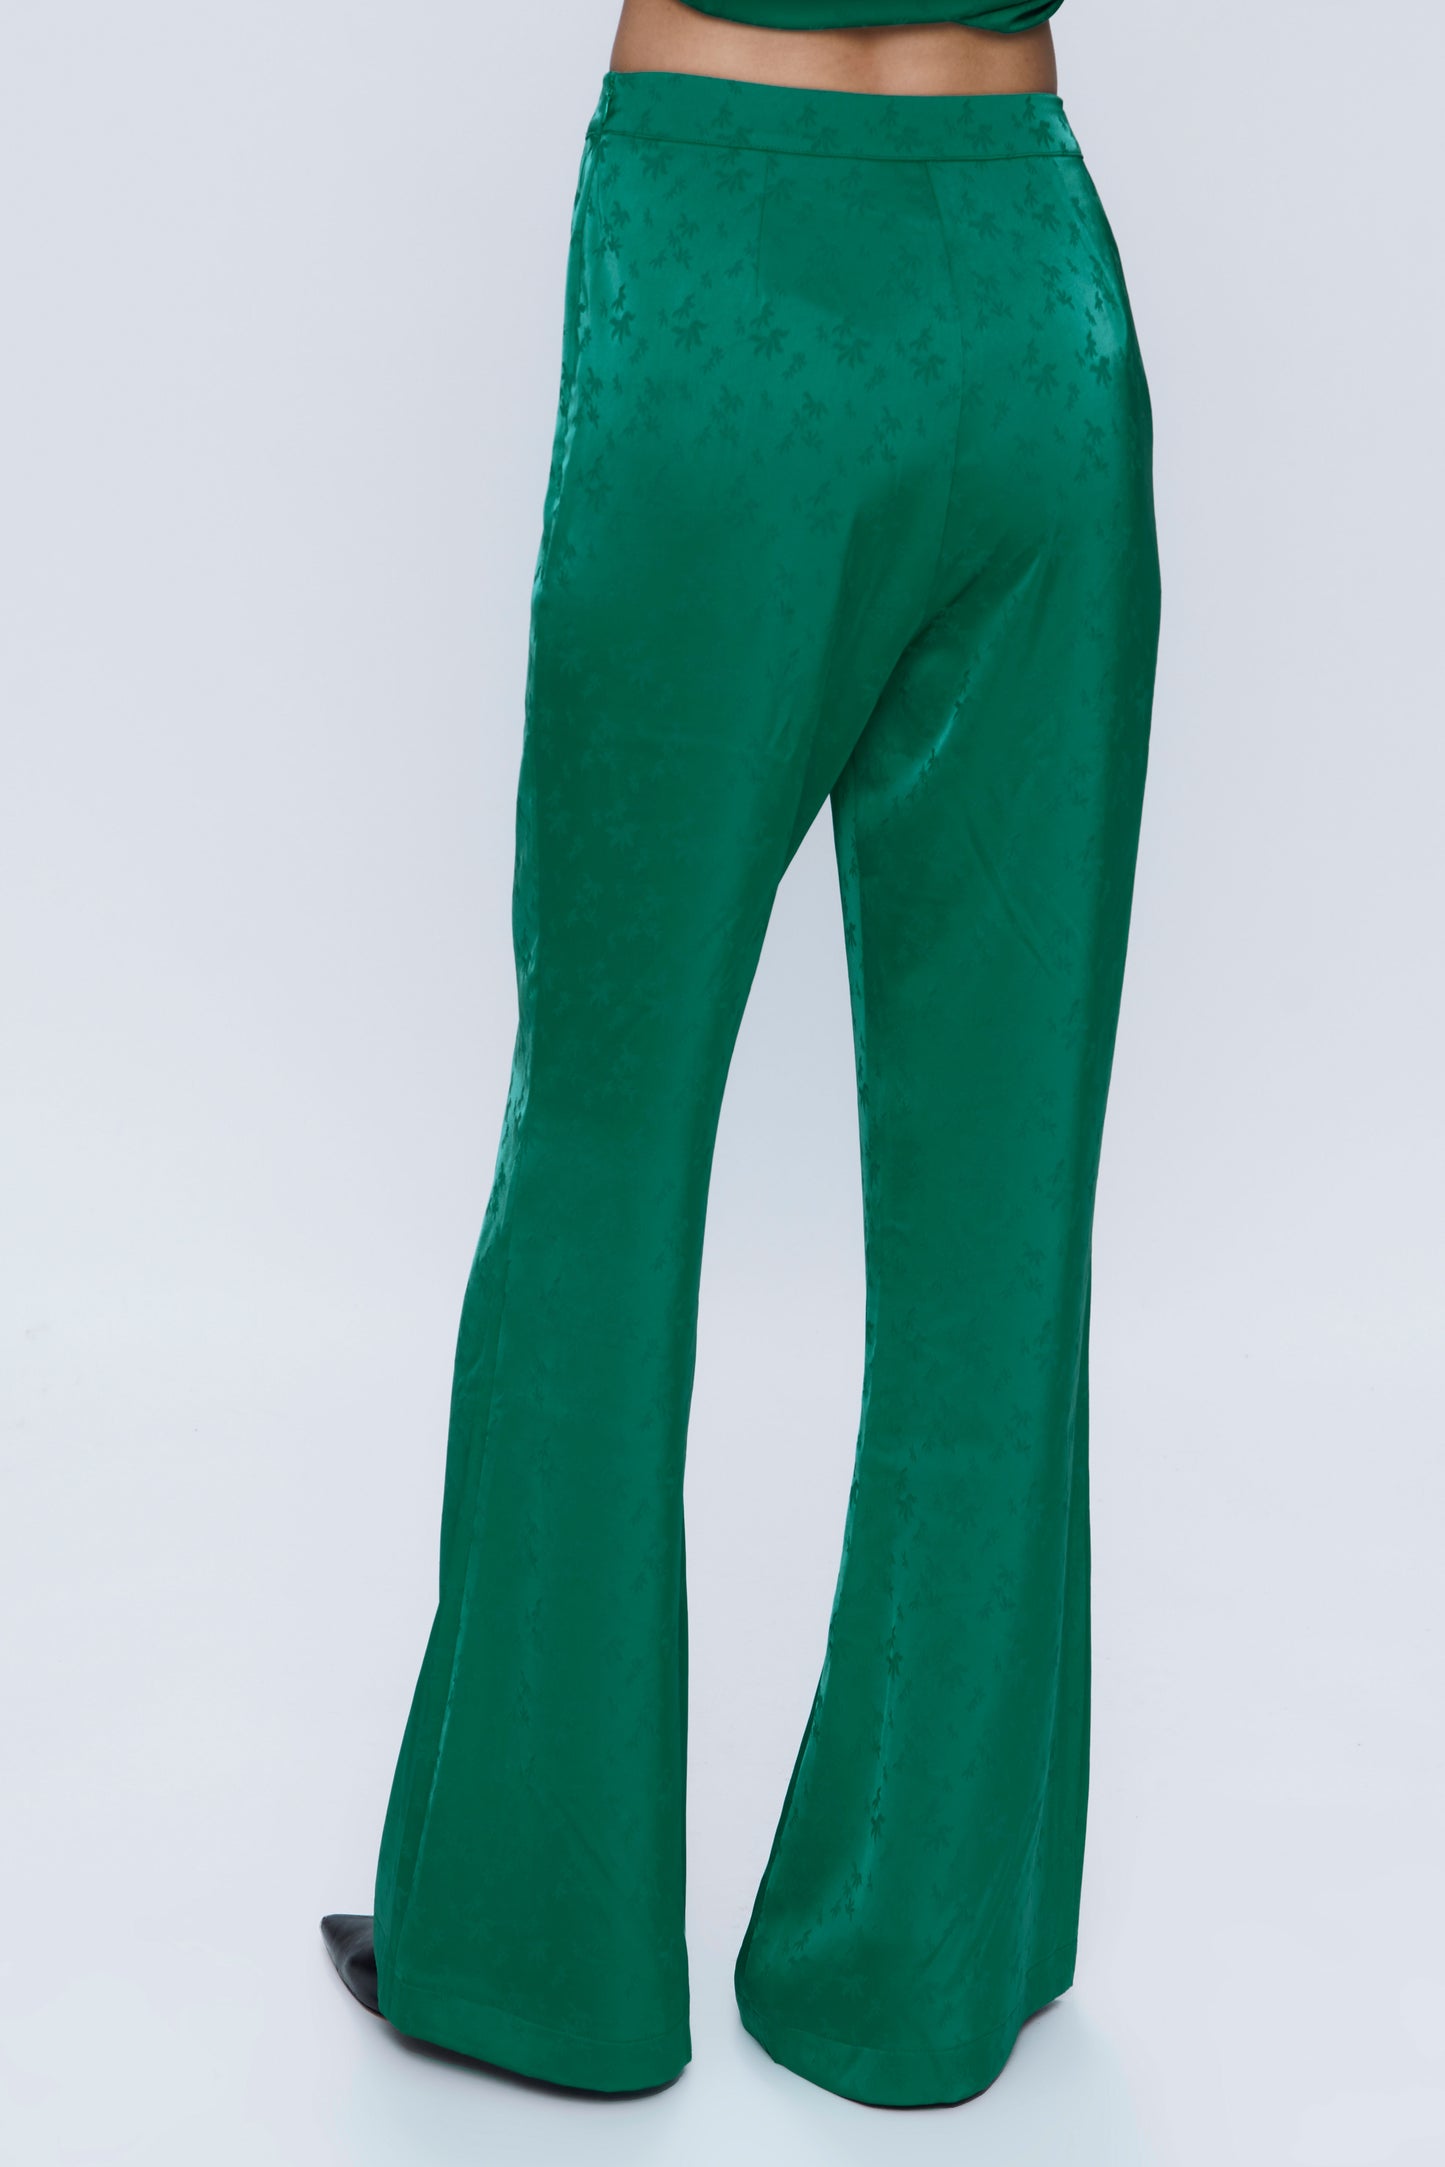 Flowing suit pants in green jacquard